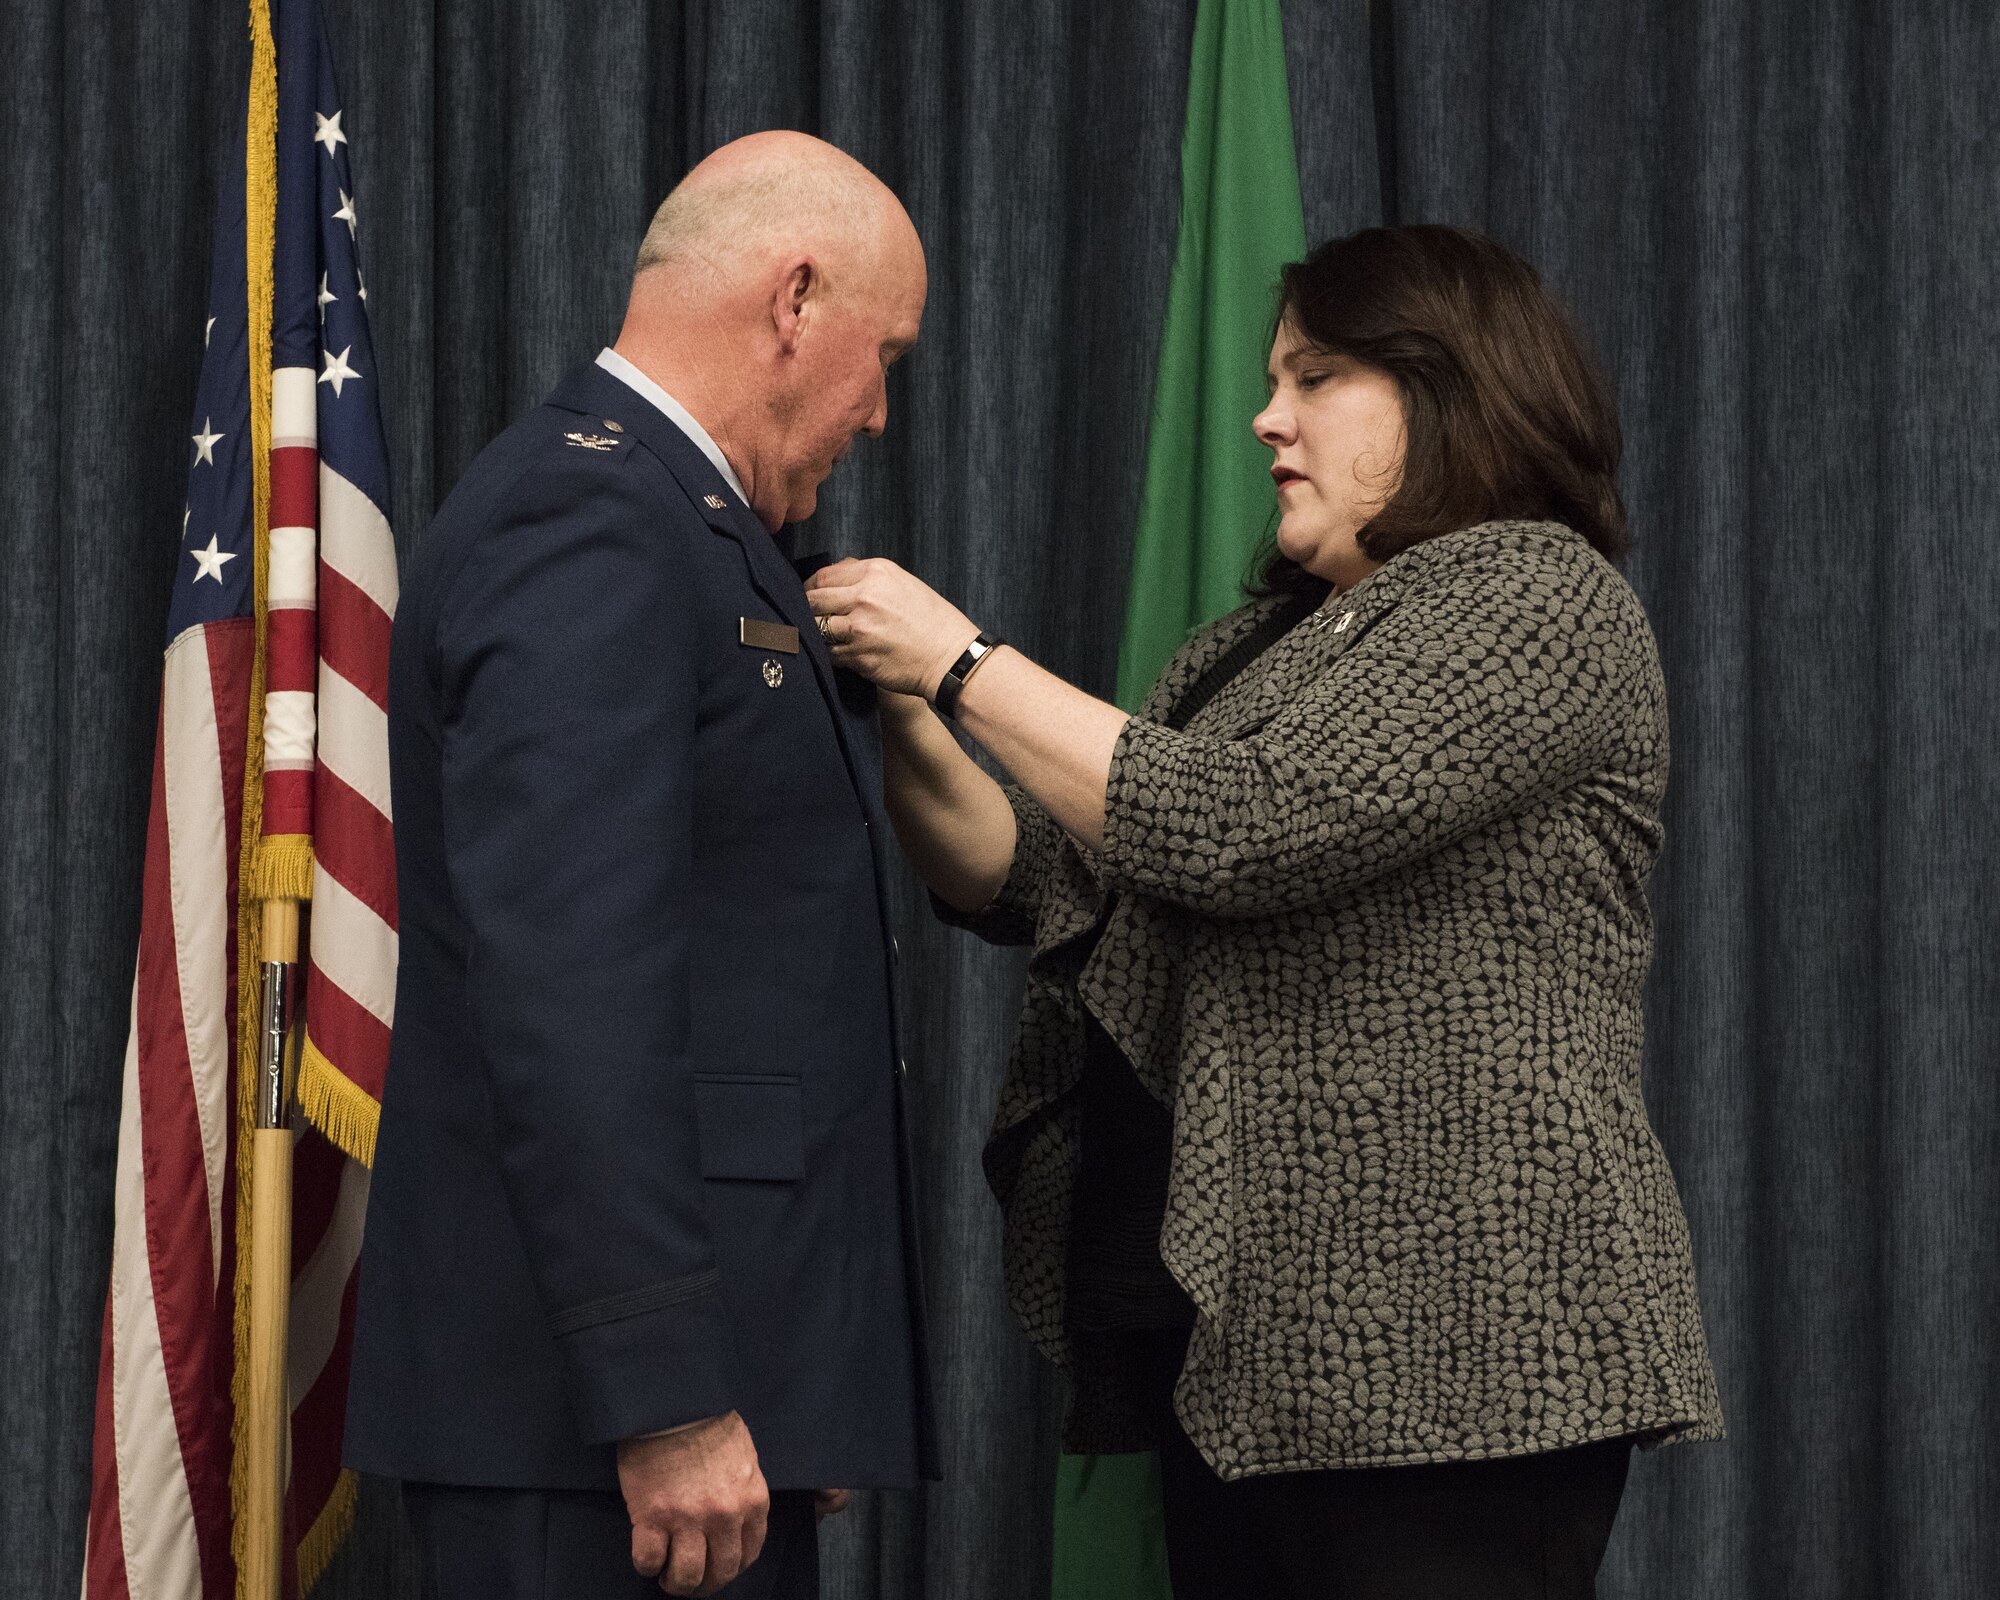 Col. David Dixon, former 141st Maintenance Group commander, watches as his wife, Cathy, places his retirement pin on his lapel during his retirement ceremony January 7, 2018 at Fairchild Air Force Base, Wash. Col. Dixon served more than 30 years in the Air Force, with nearly 19 of those years in the Washington Air National Guard. (U.S. Air National Guard photo by Staff Sgt. Rose M. Lust/Released)